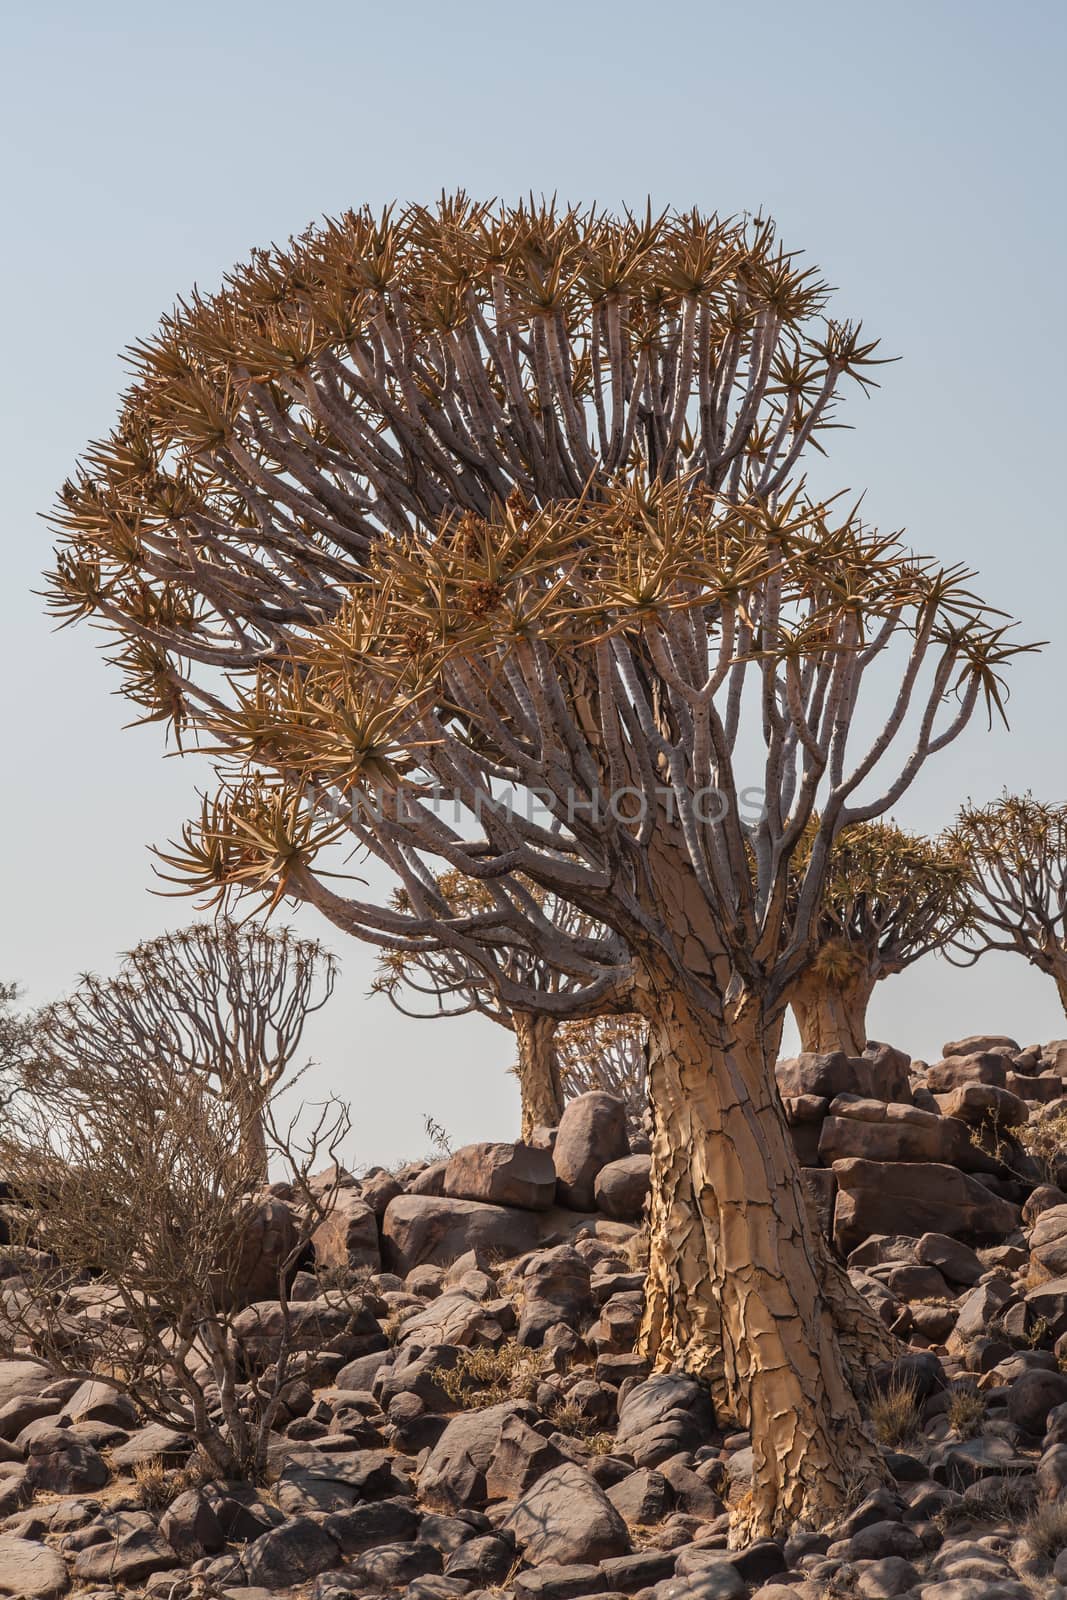 Aloidendron dichotomum, formerly Aloe dichotoma, the quiver tree or kokerboom, is a tall, branching species of succulent plant, indigenous to Southern Africa, specifically in the Northern Cape region of South Africa, and parts of Southern Namibia.